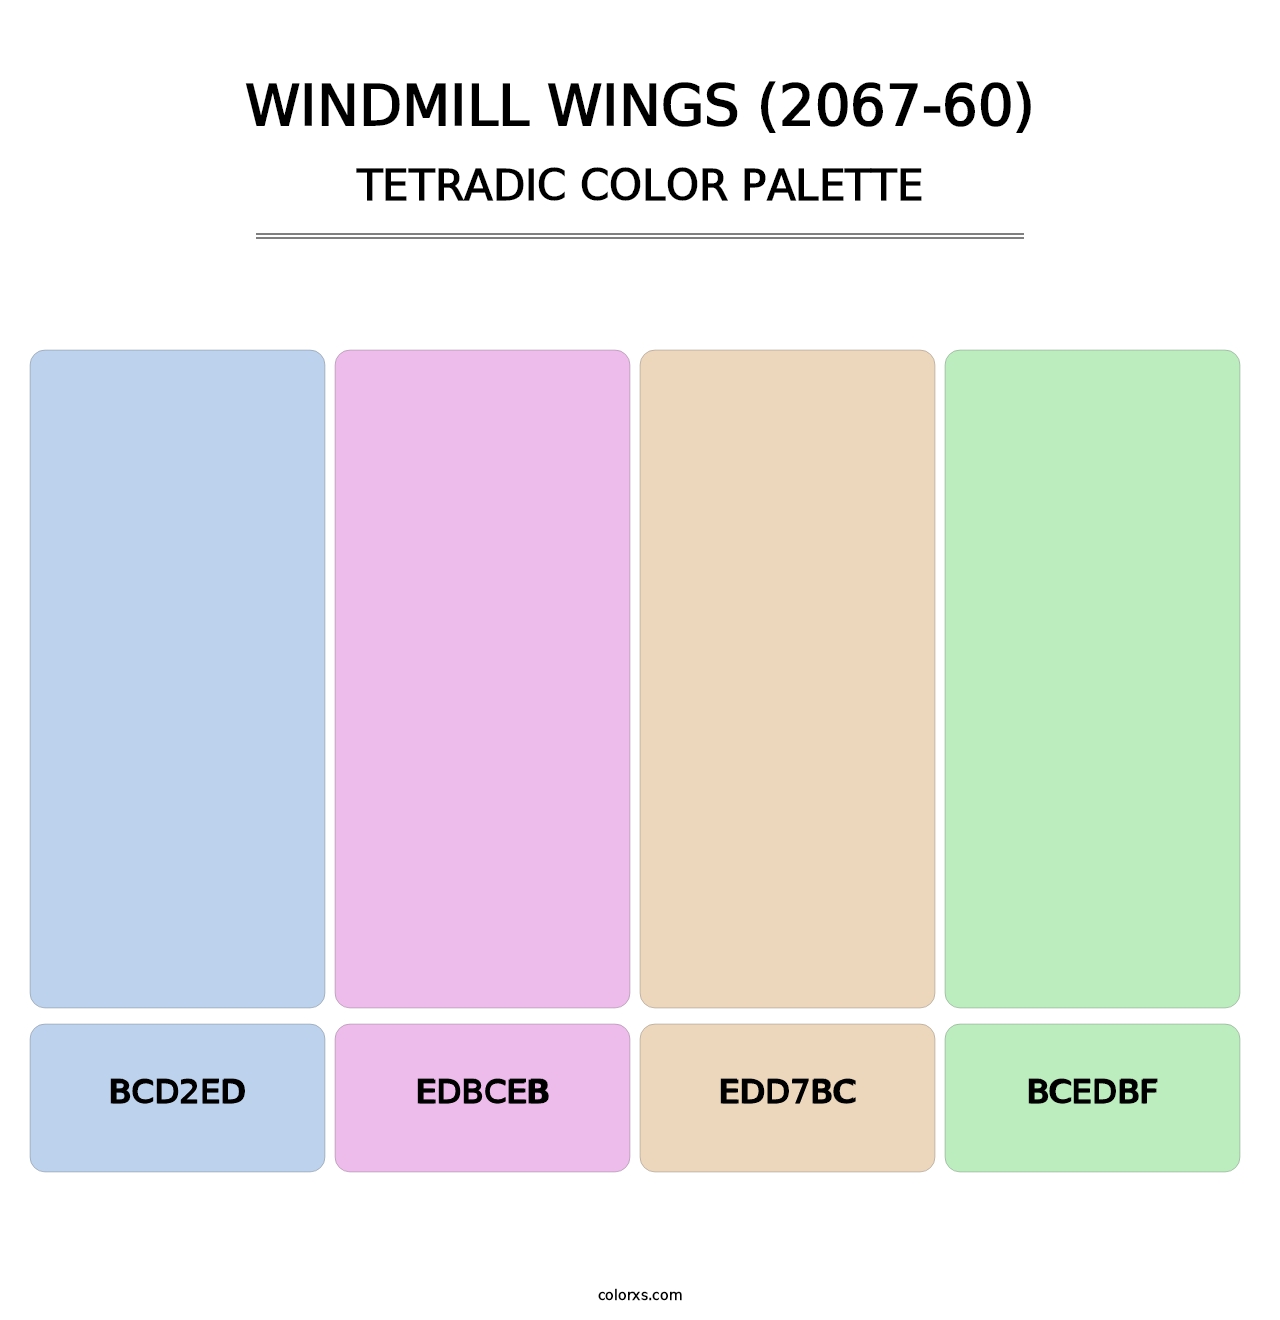 Windmill Wings (2067-60) - Tetradic Color Palette